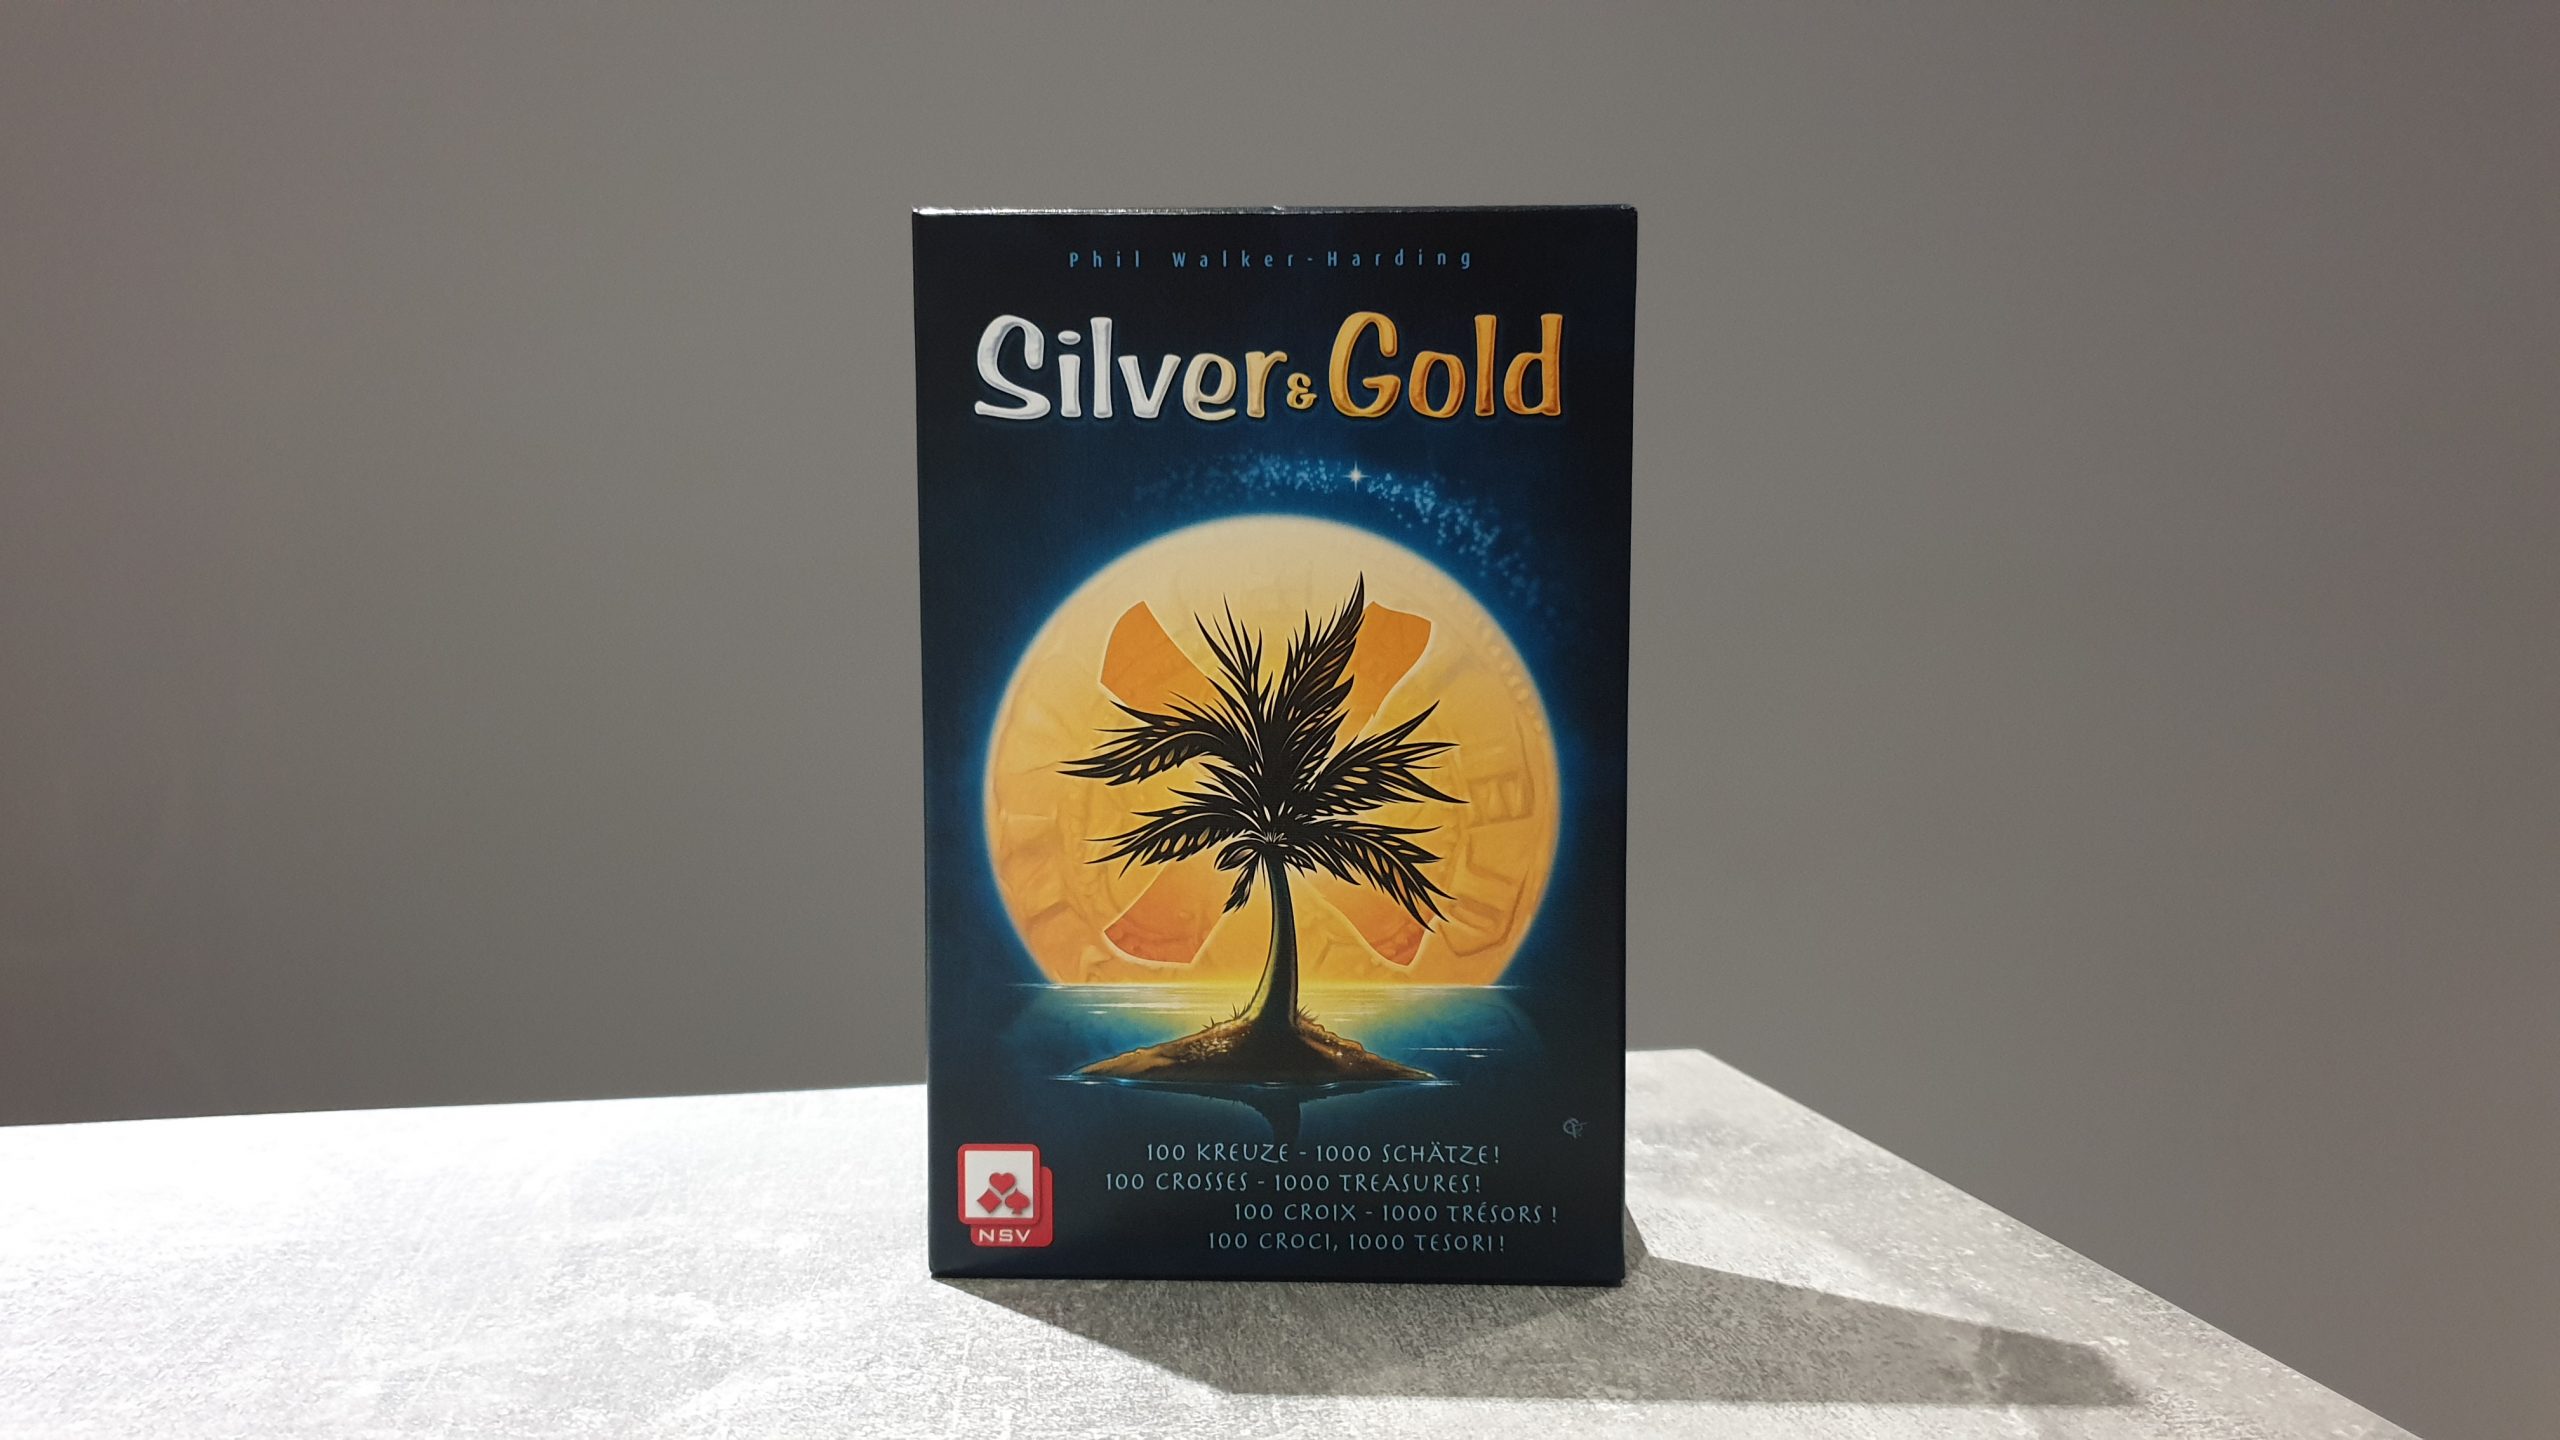 Silver & Gold Review – Flipping Good